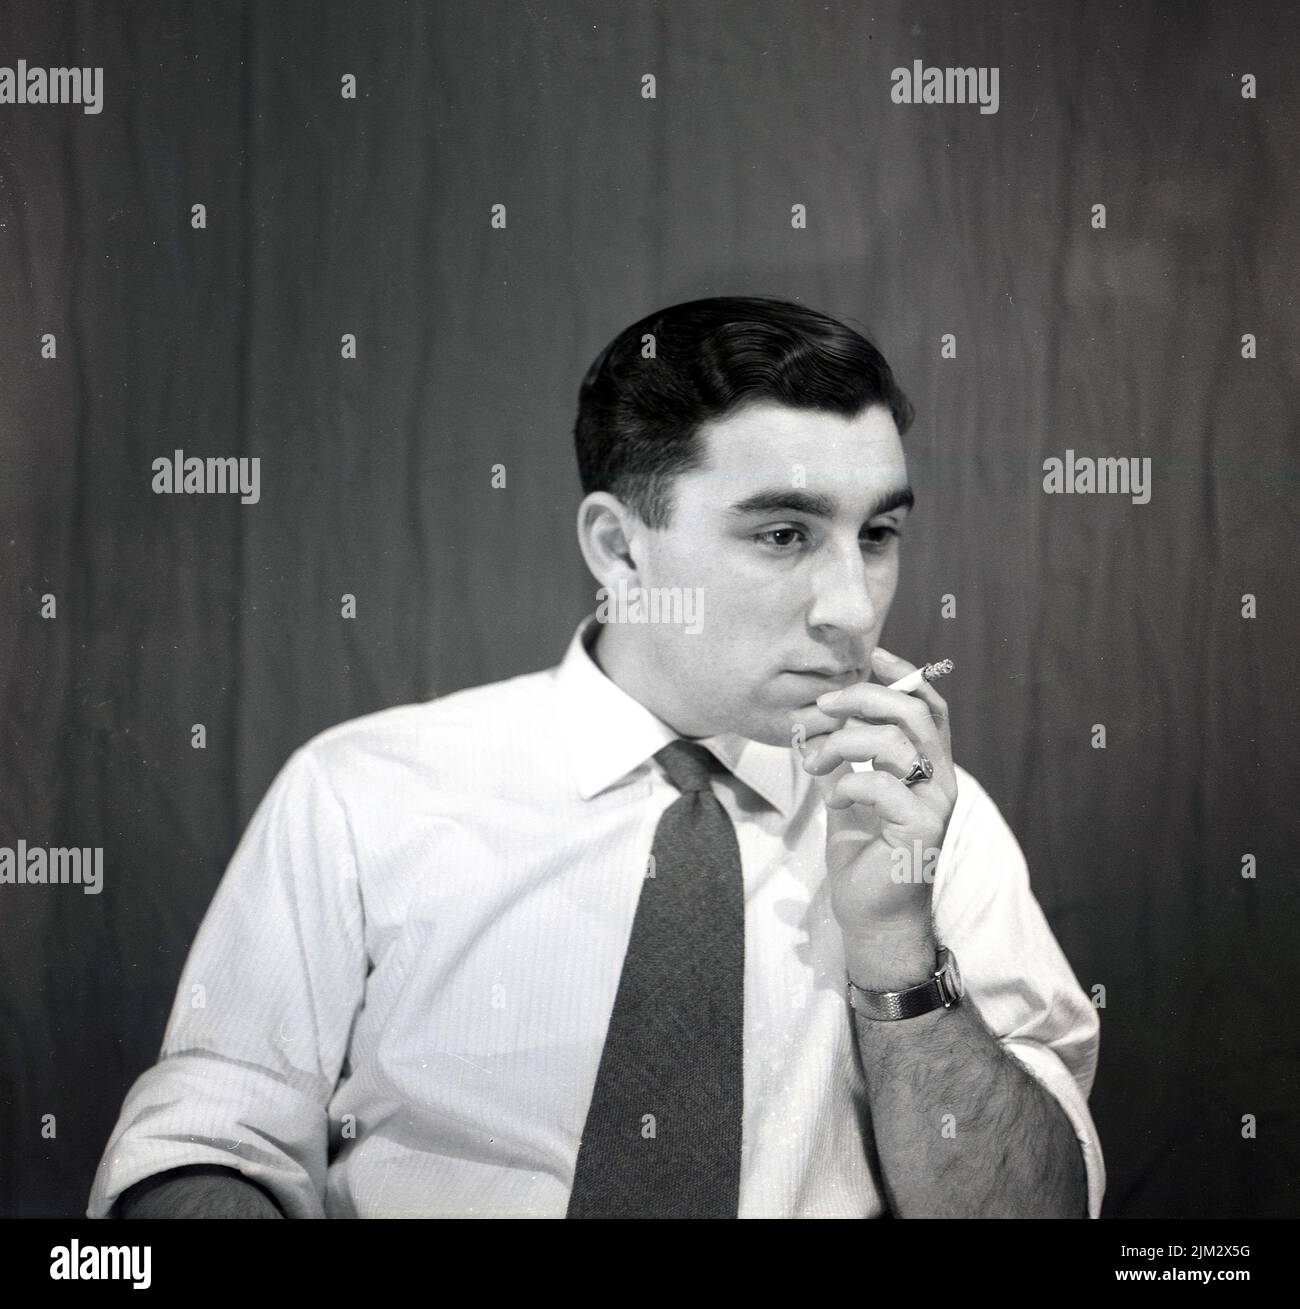 1950s, historical, man  in a shirt & tie sitting, smoking a cigarette, thinking. Stock Photo